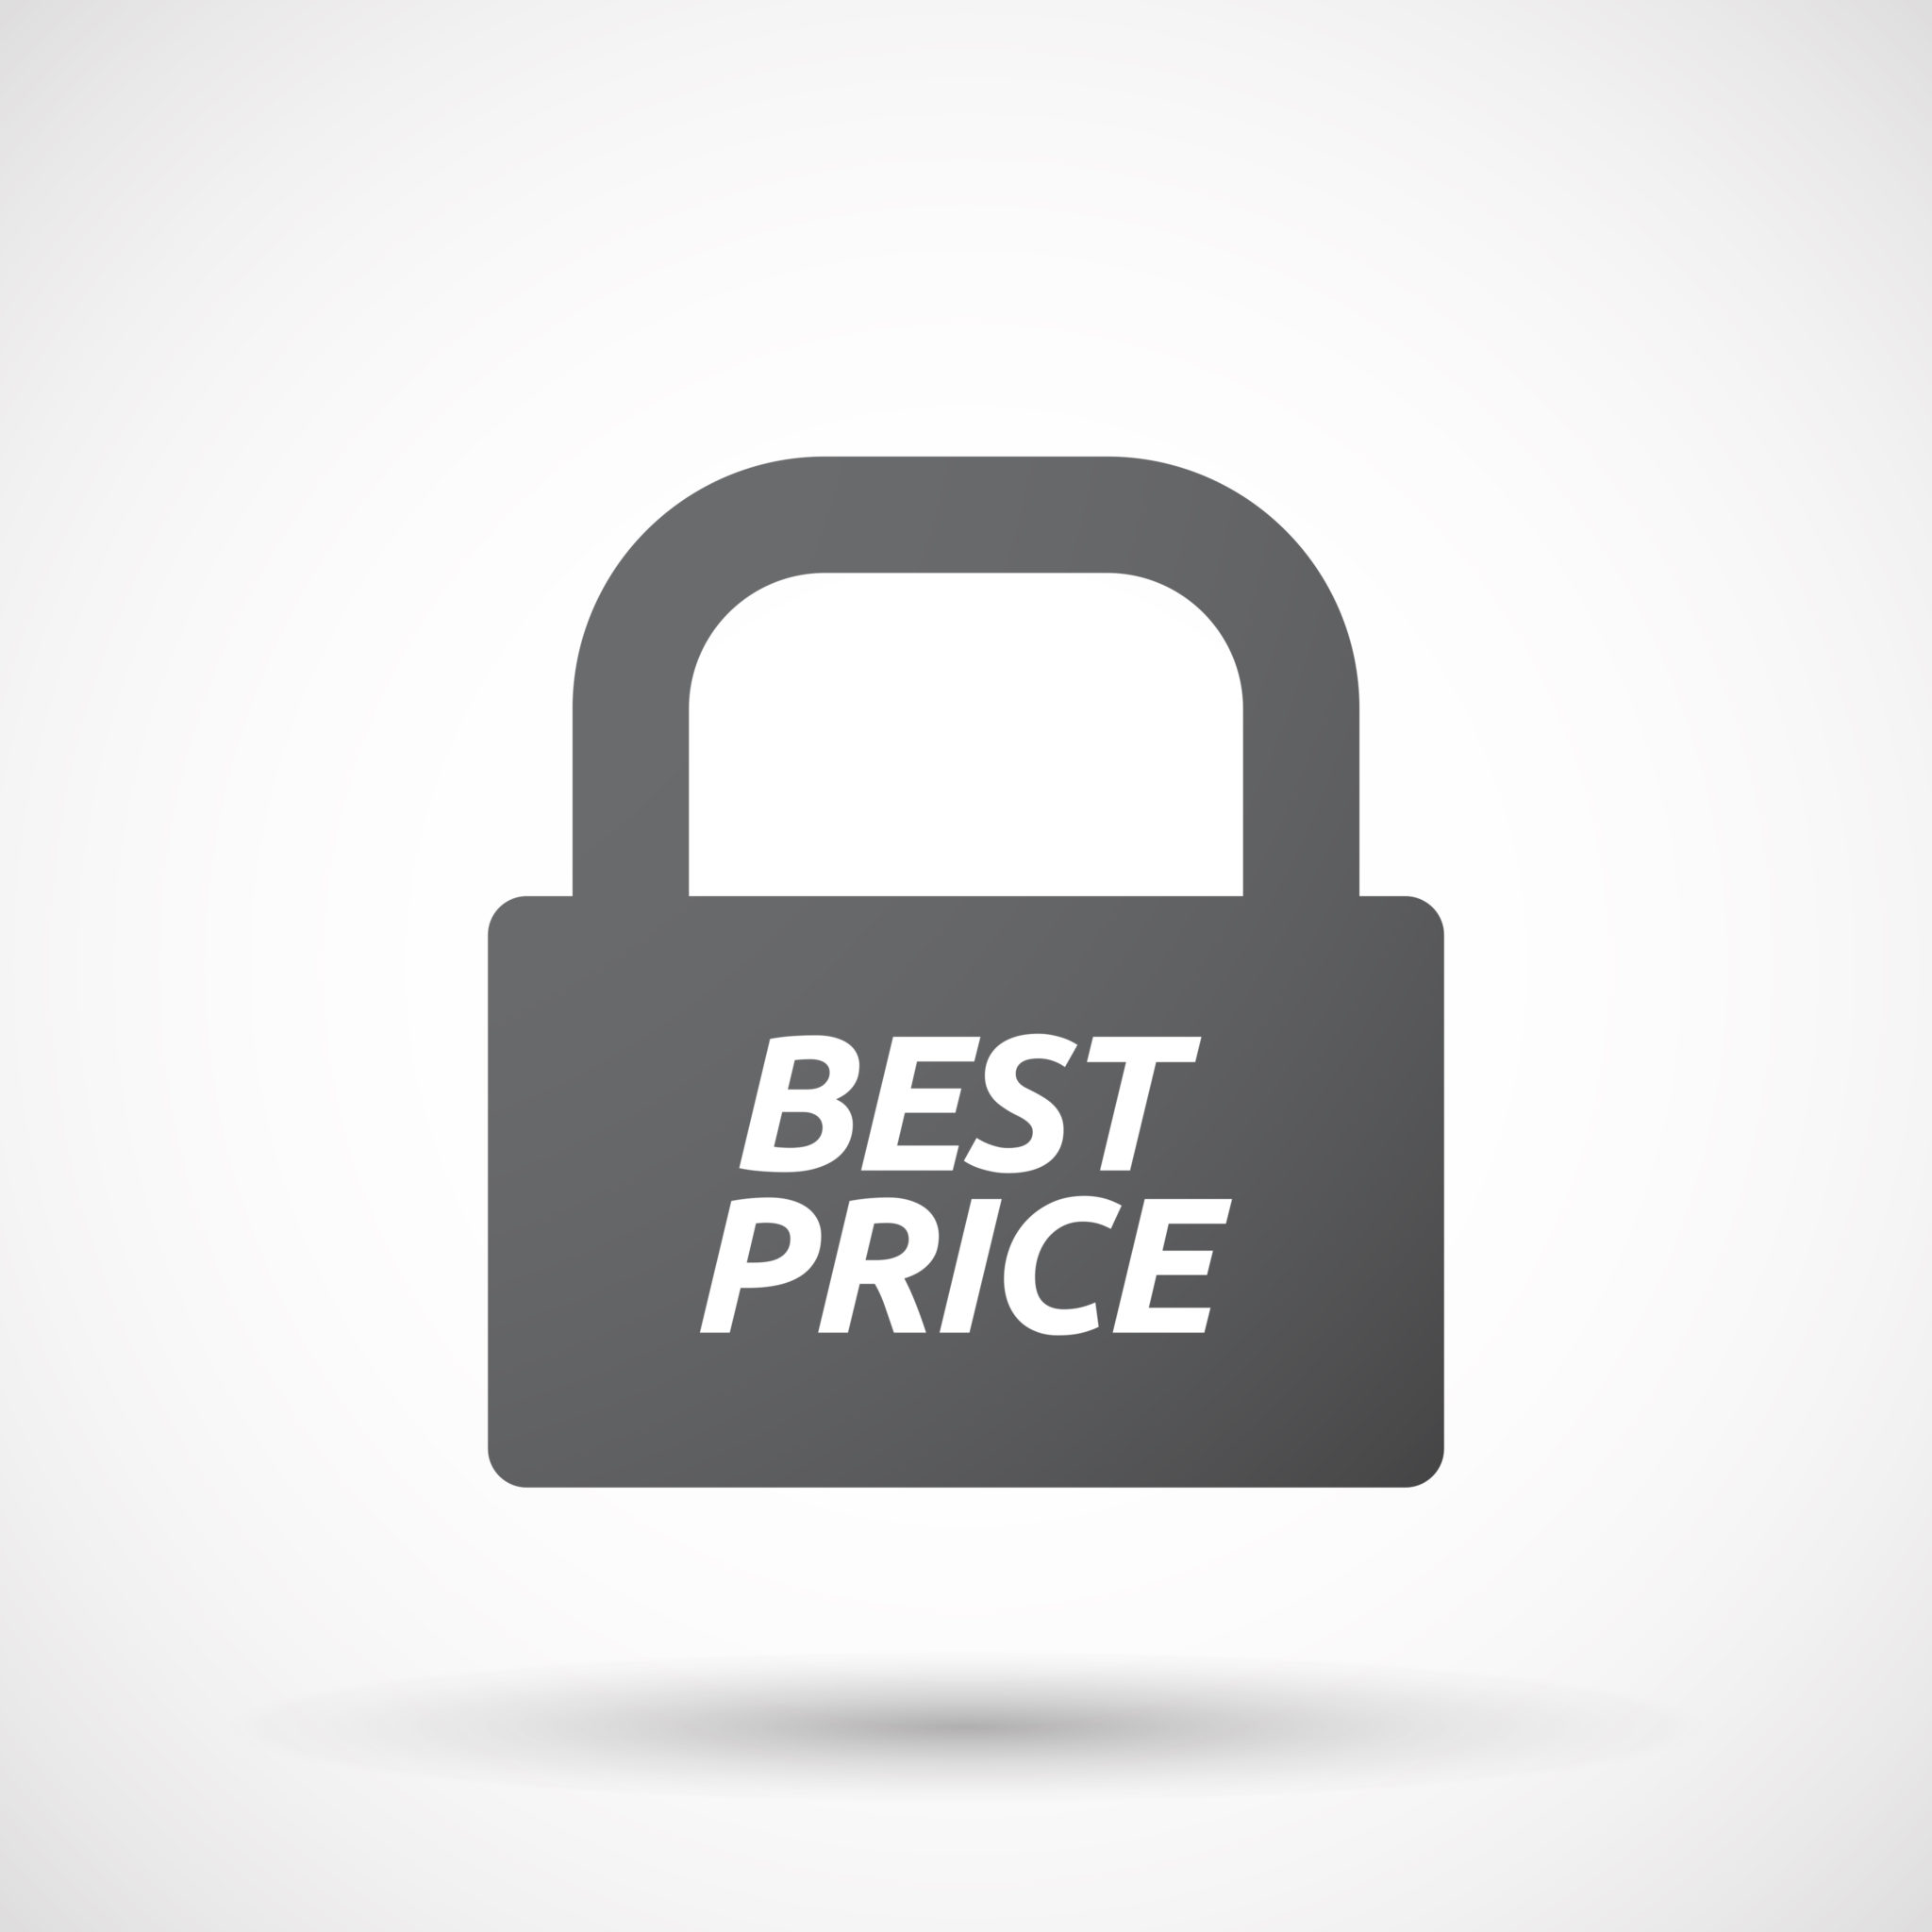 Get the “best price” for your security